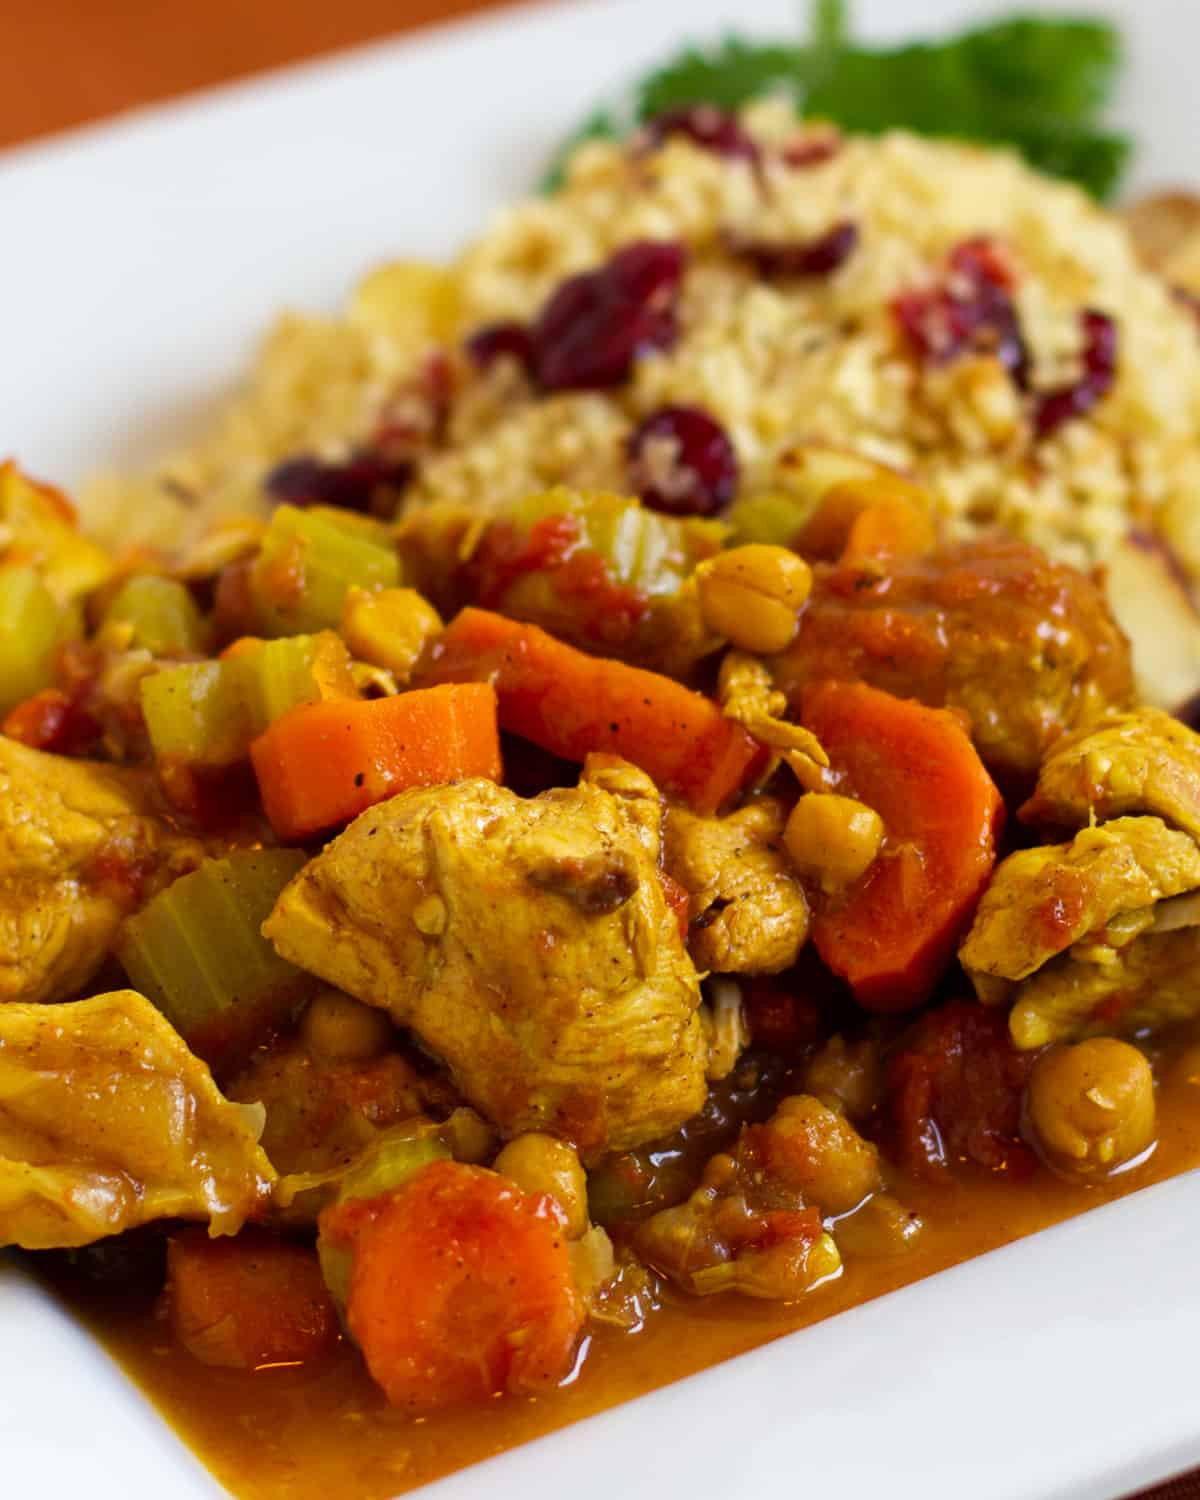 A plate of chicken tagine and couscous.